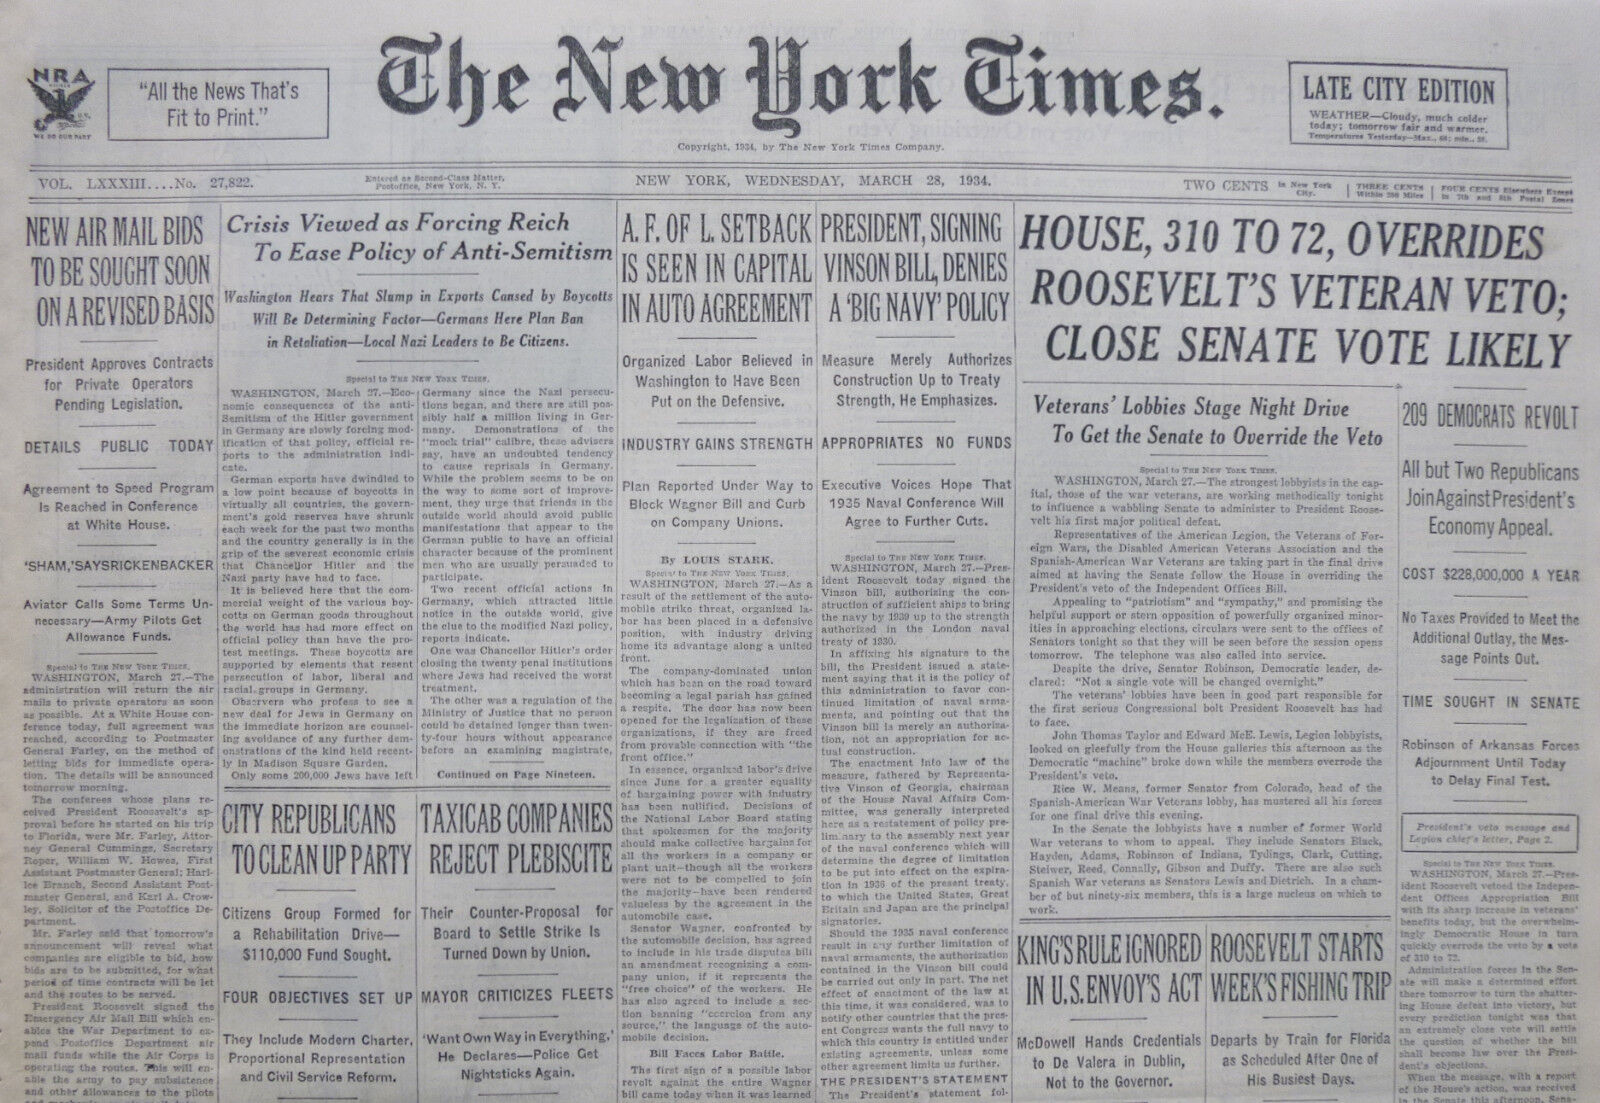 3-1934 March 28 CRISIS VIEWED AS FORCING REICH EASE POLICY OF ANTI-SEMITISM 81st